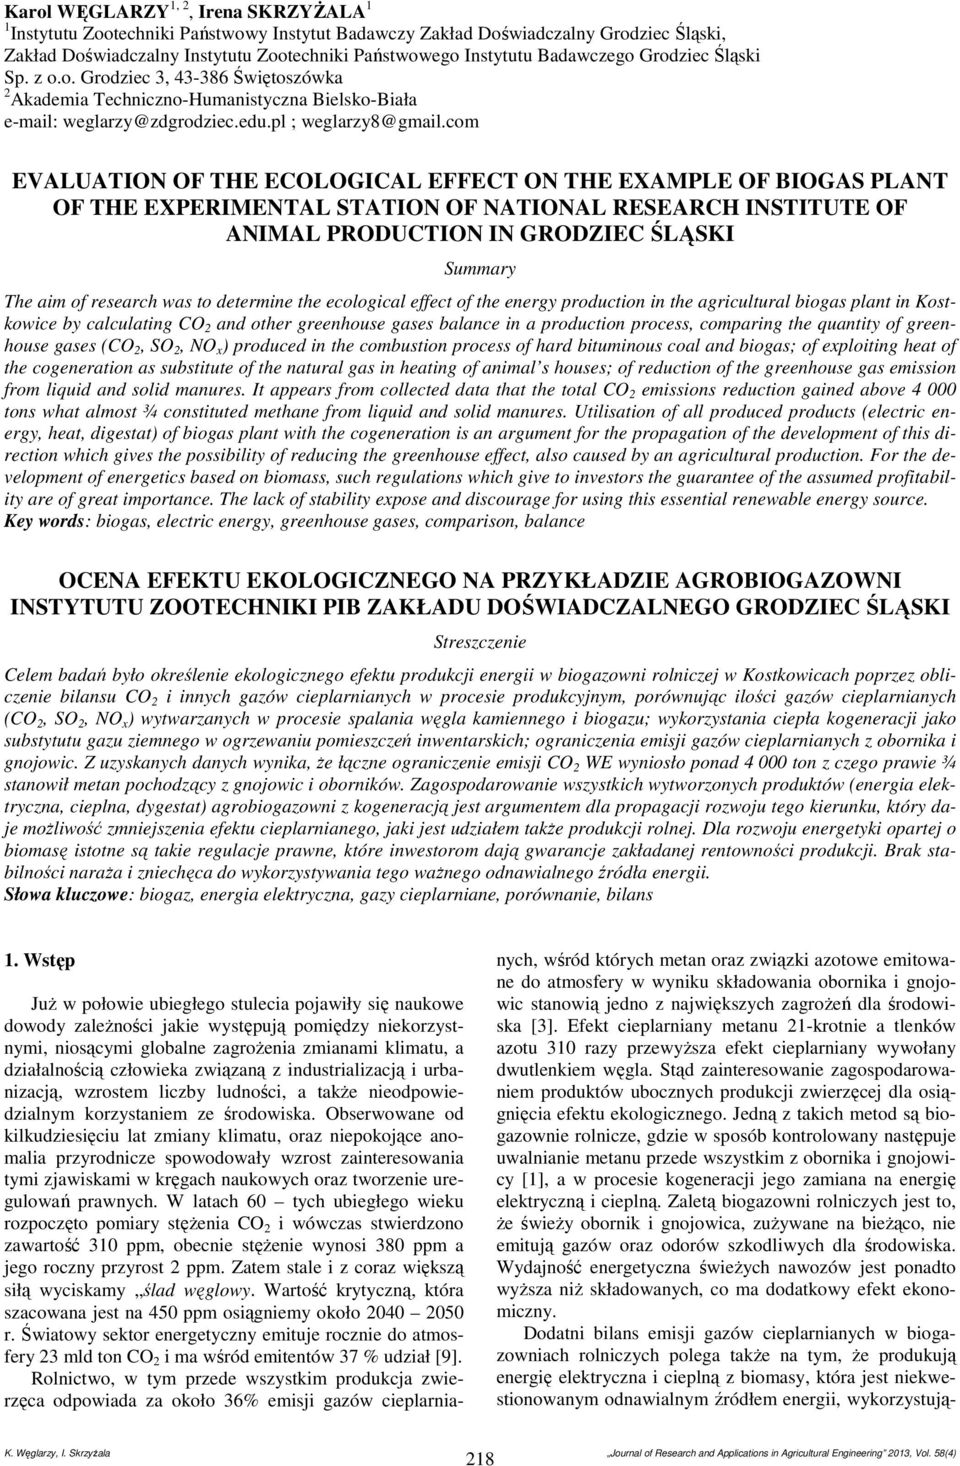 com EVALUATION OF THE ECOLOGICAL EFFECT ON THE EXAMPLE OF BIOGAS PLANT OF THE EXPERIMENTAL STATION OF NATIONAL RESEARCH INSTITUTE OF ANIMAL PRODUCTION IN GRODZIEC ŚLĄSKI Summary The aim of research